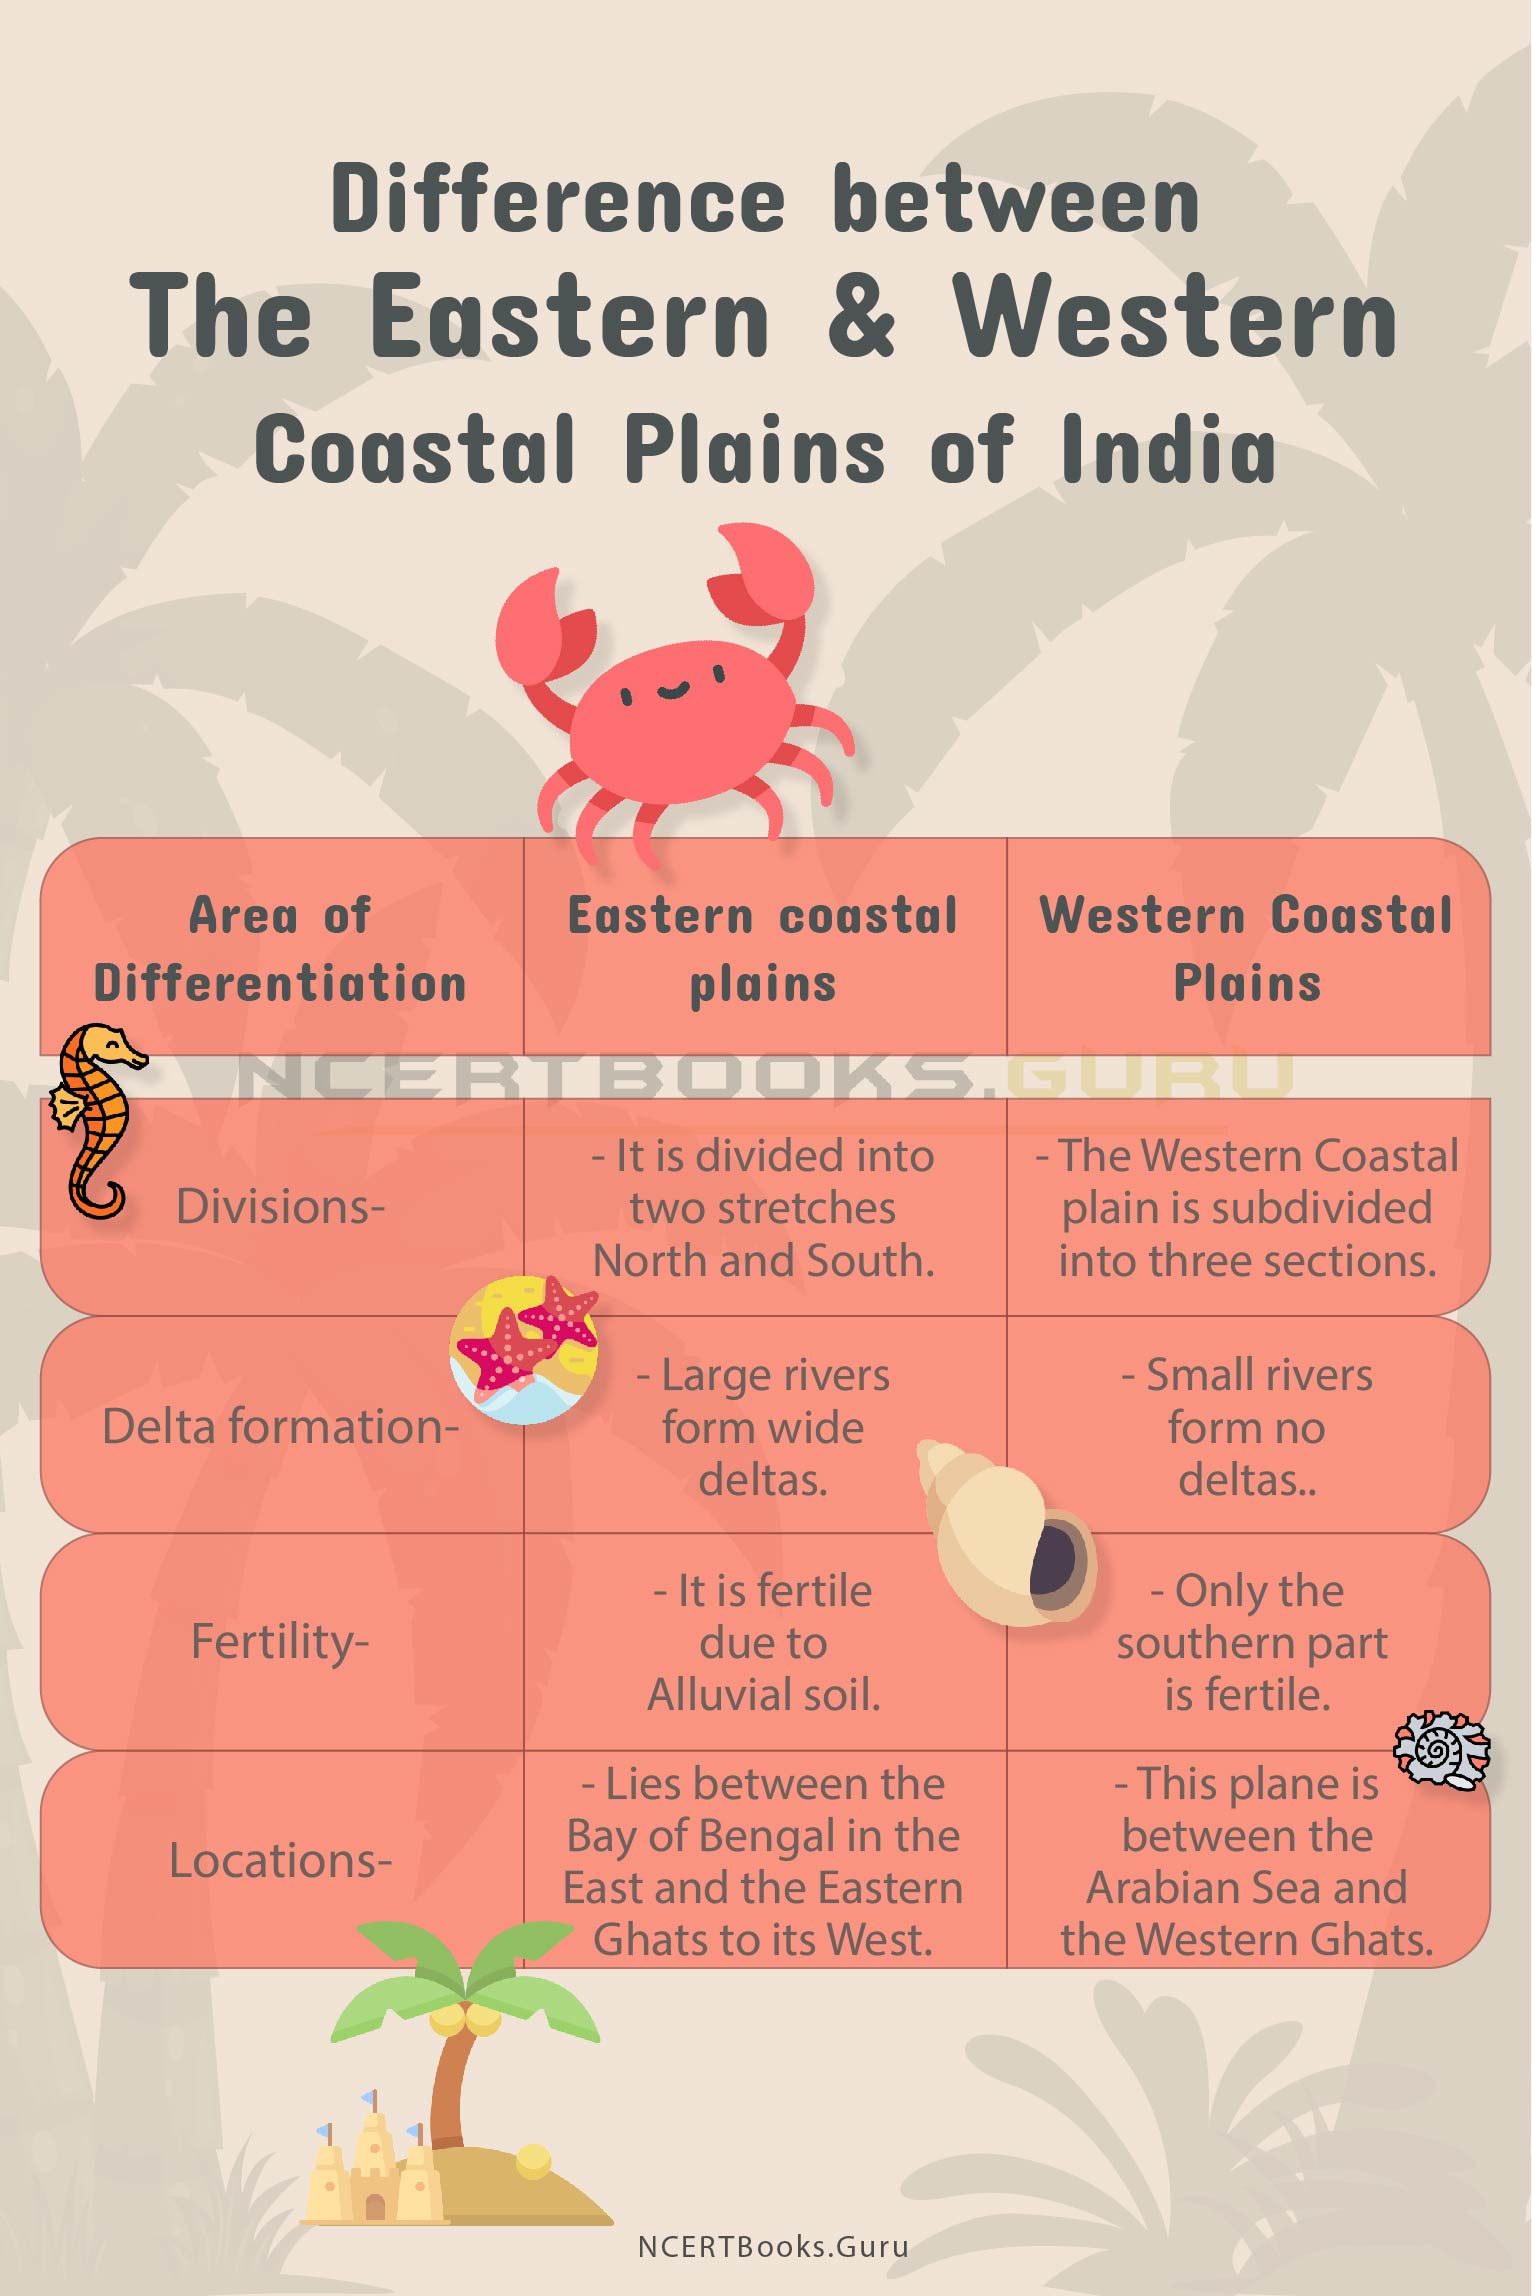 Difference Between The Eastern and Western Coastal Plains of India 2